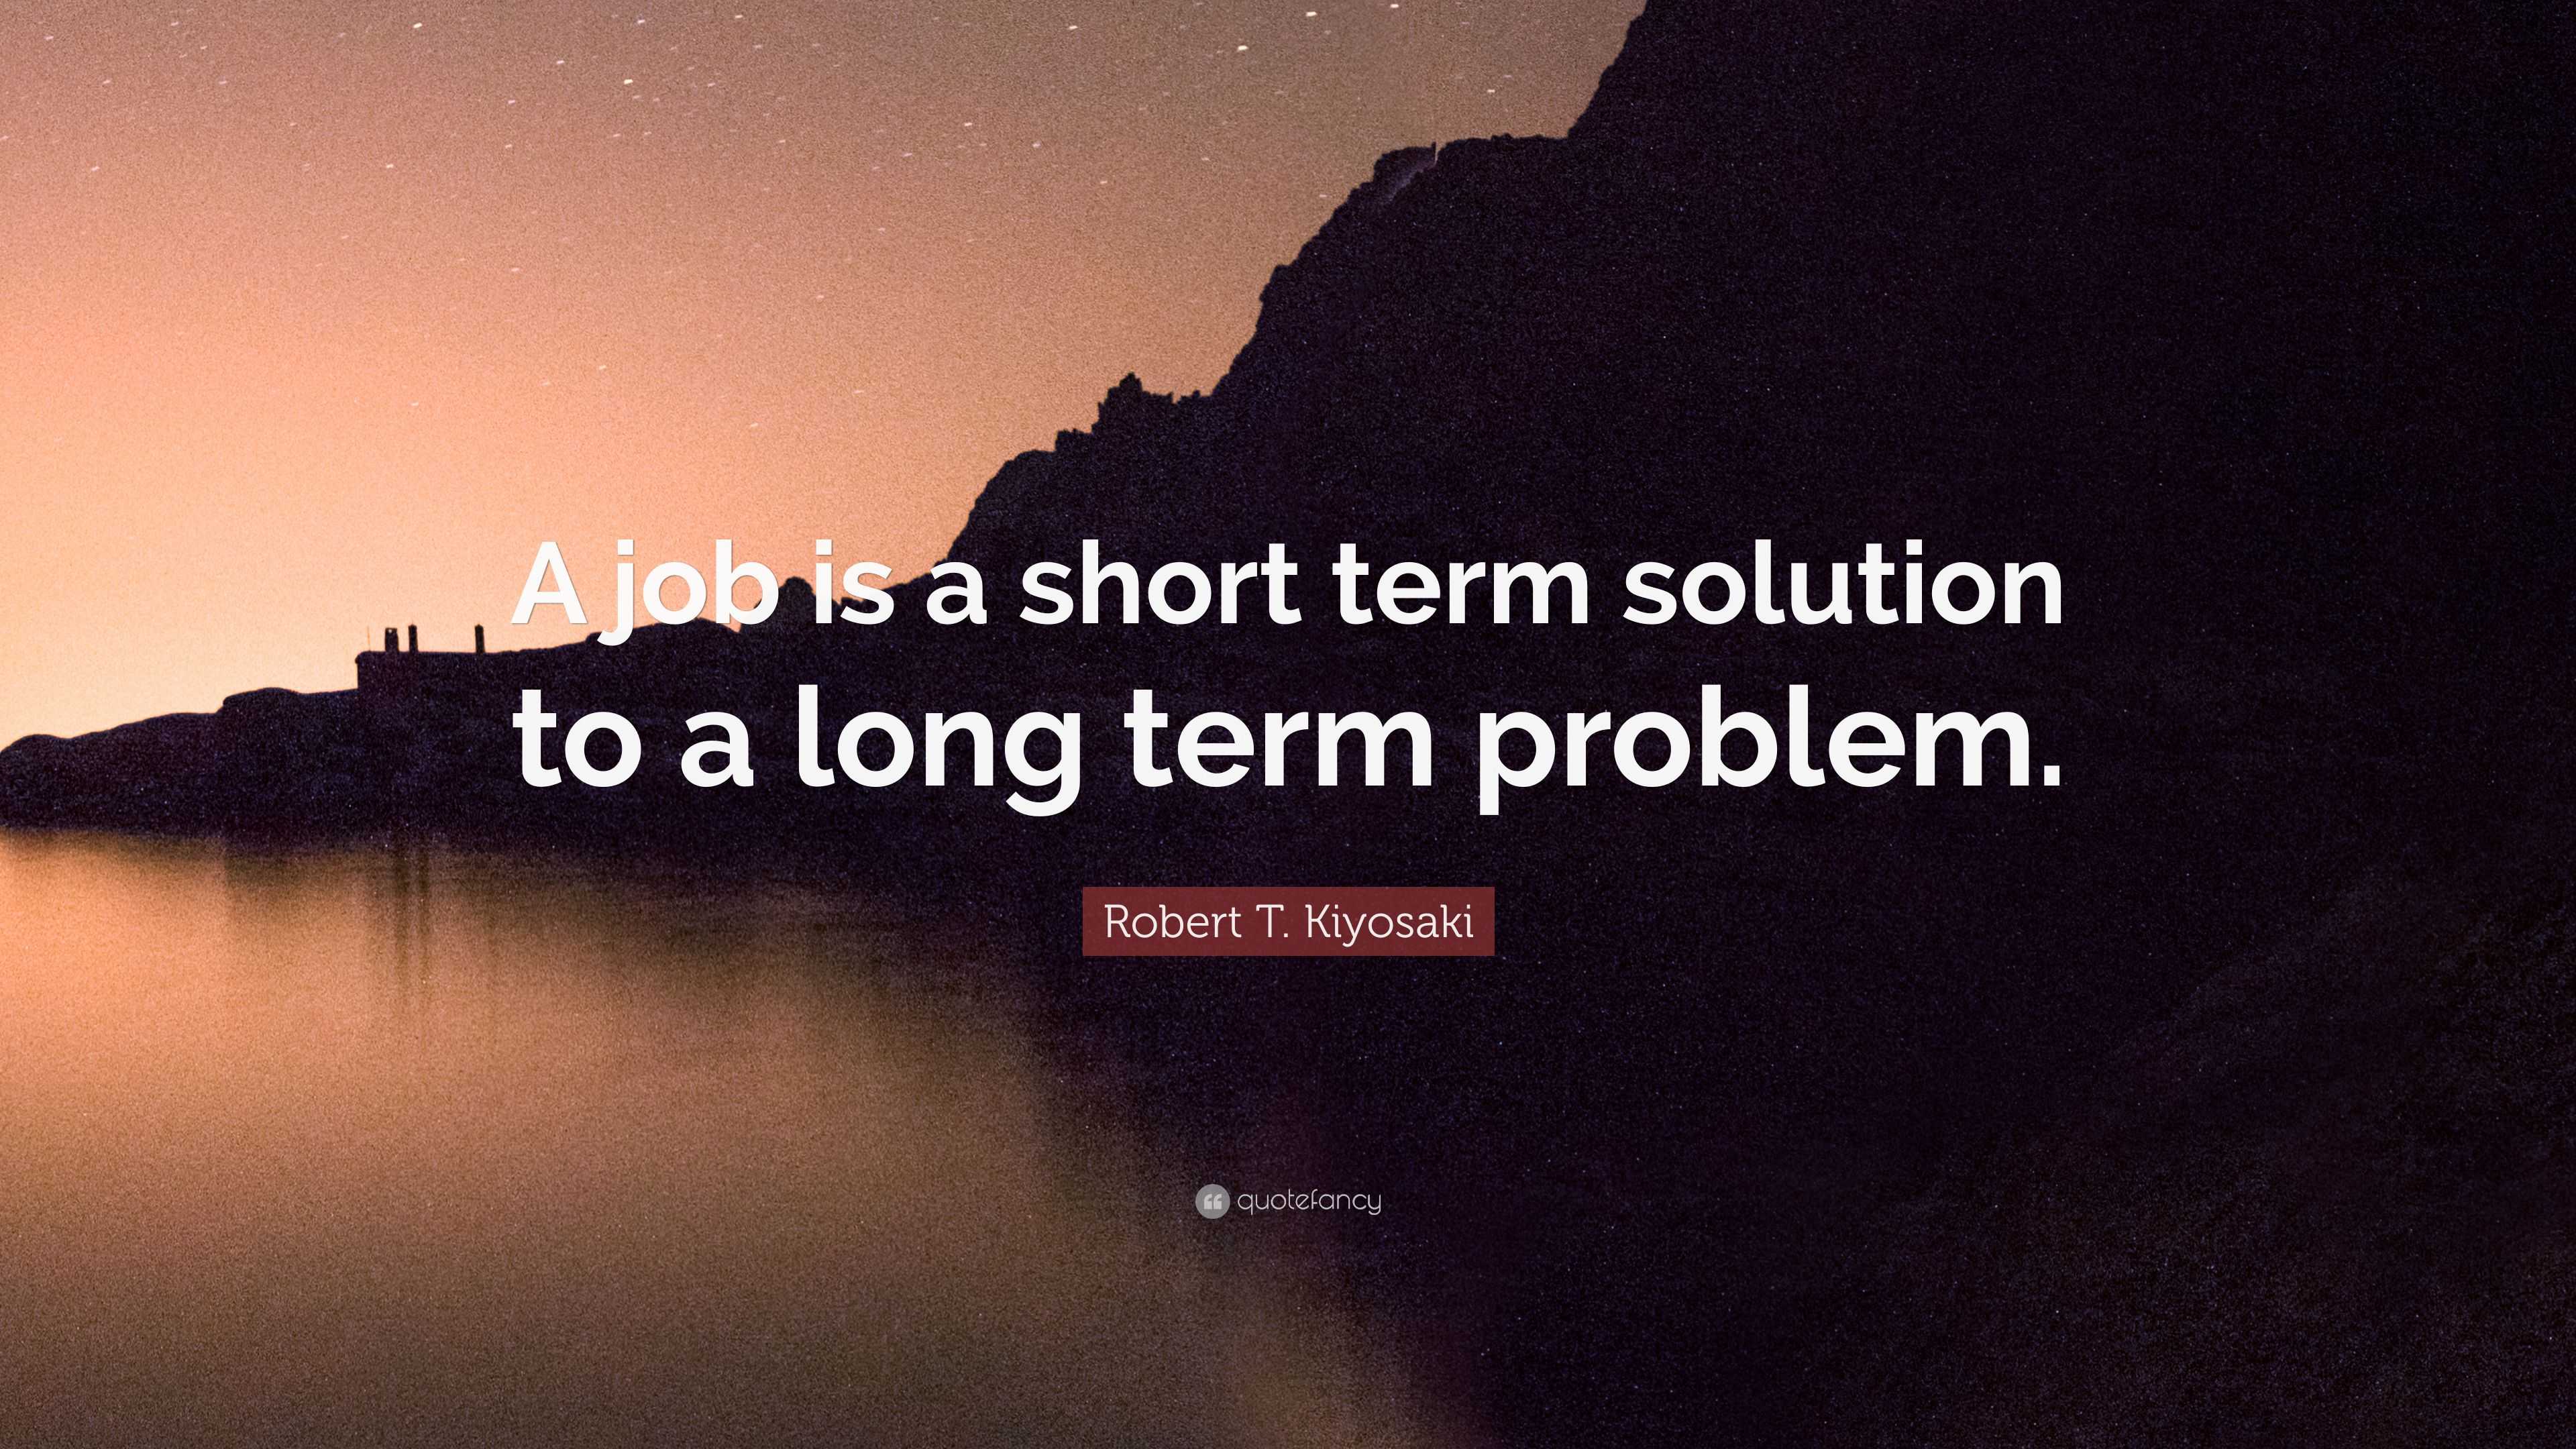 Robert T Kiyosaki Quote “a Job Is A Short Term Solution To A Long